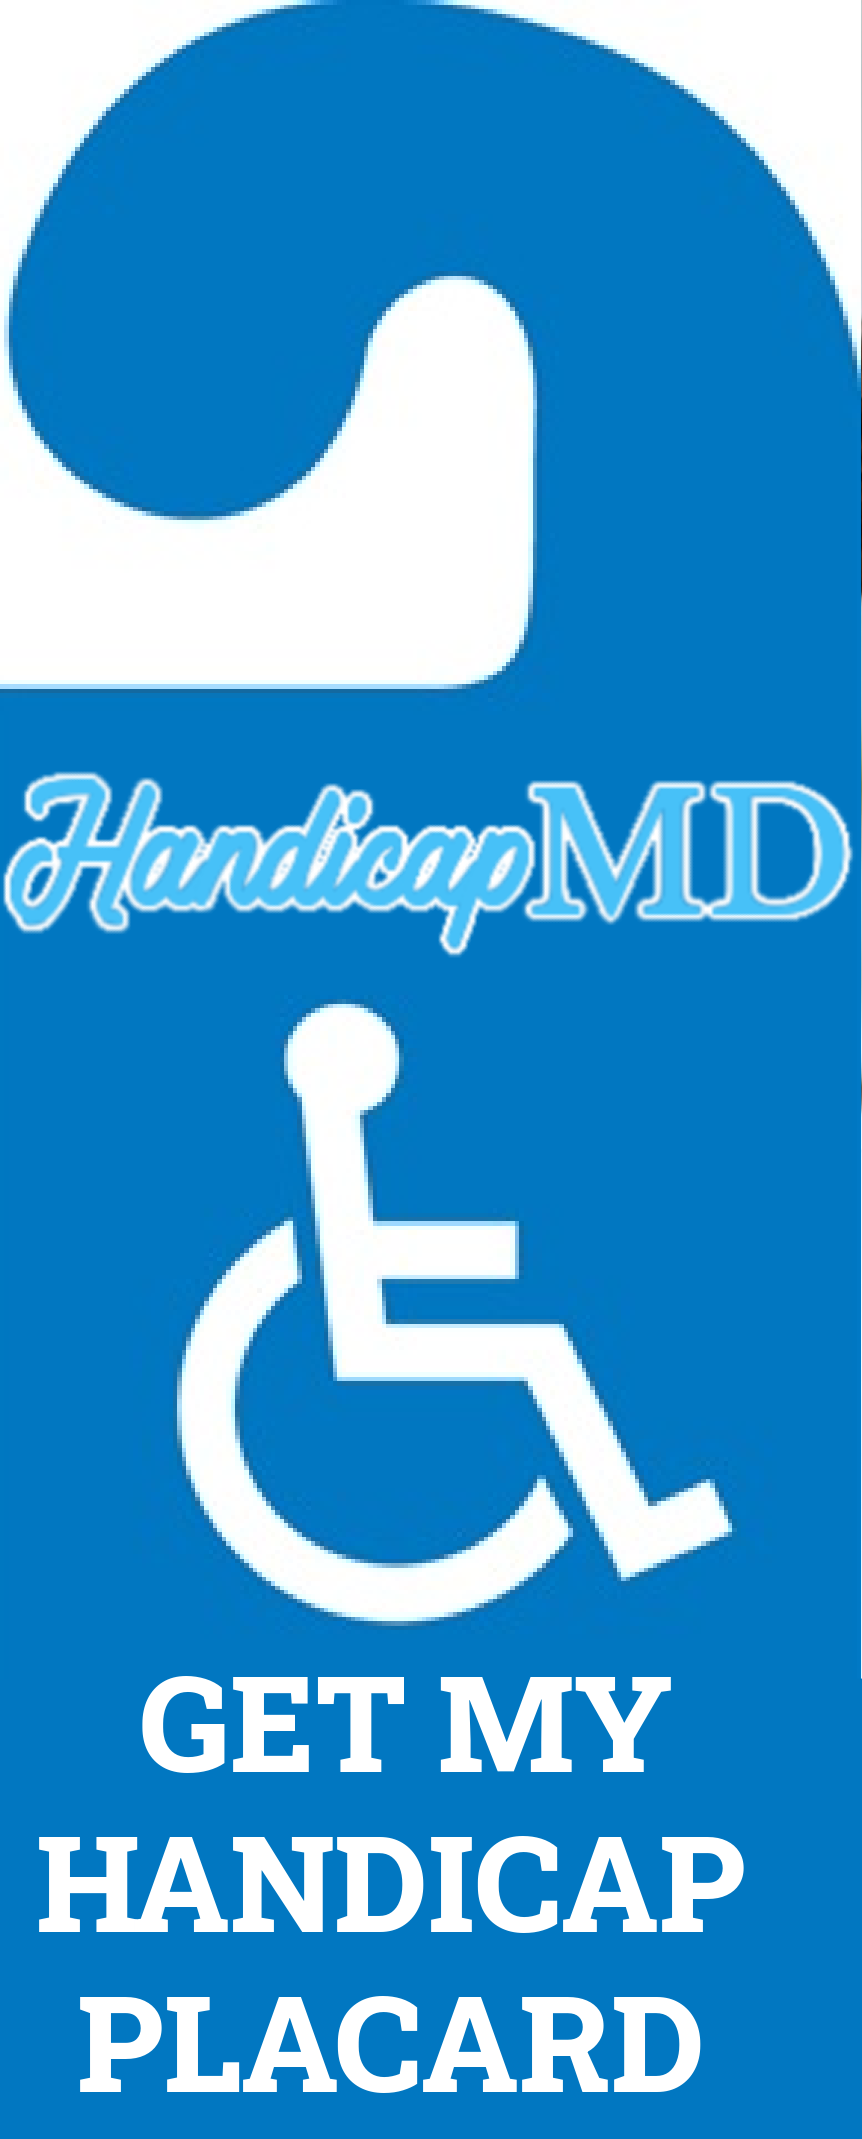 How To Get A Handicap Parking Placard Renewal in Oregon